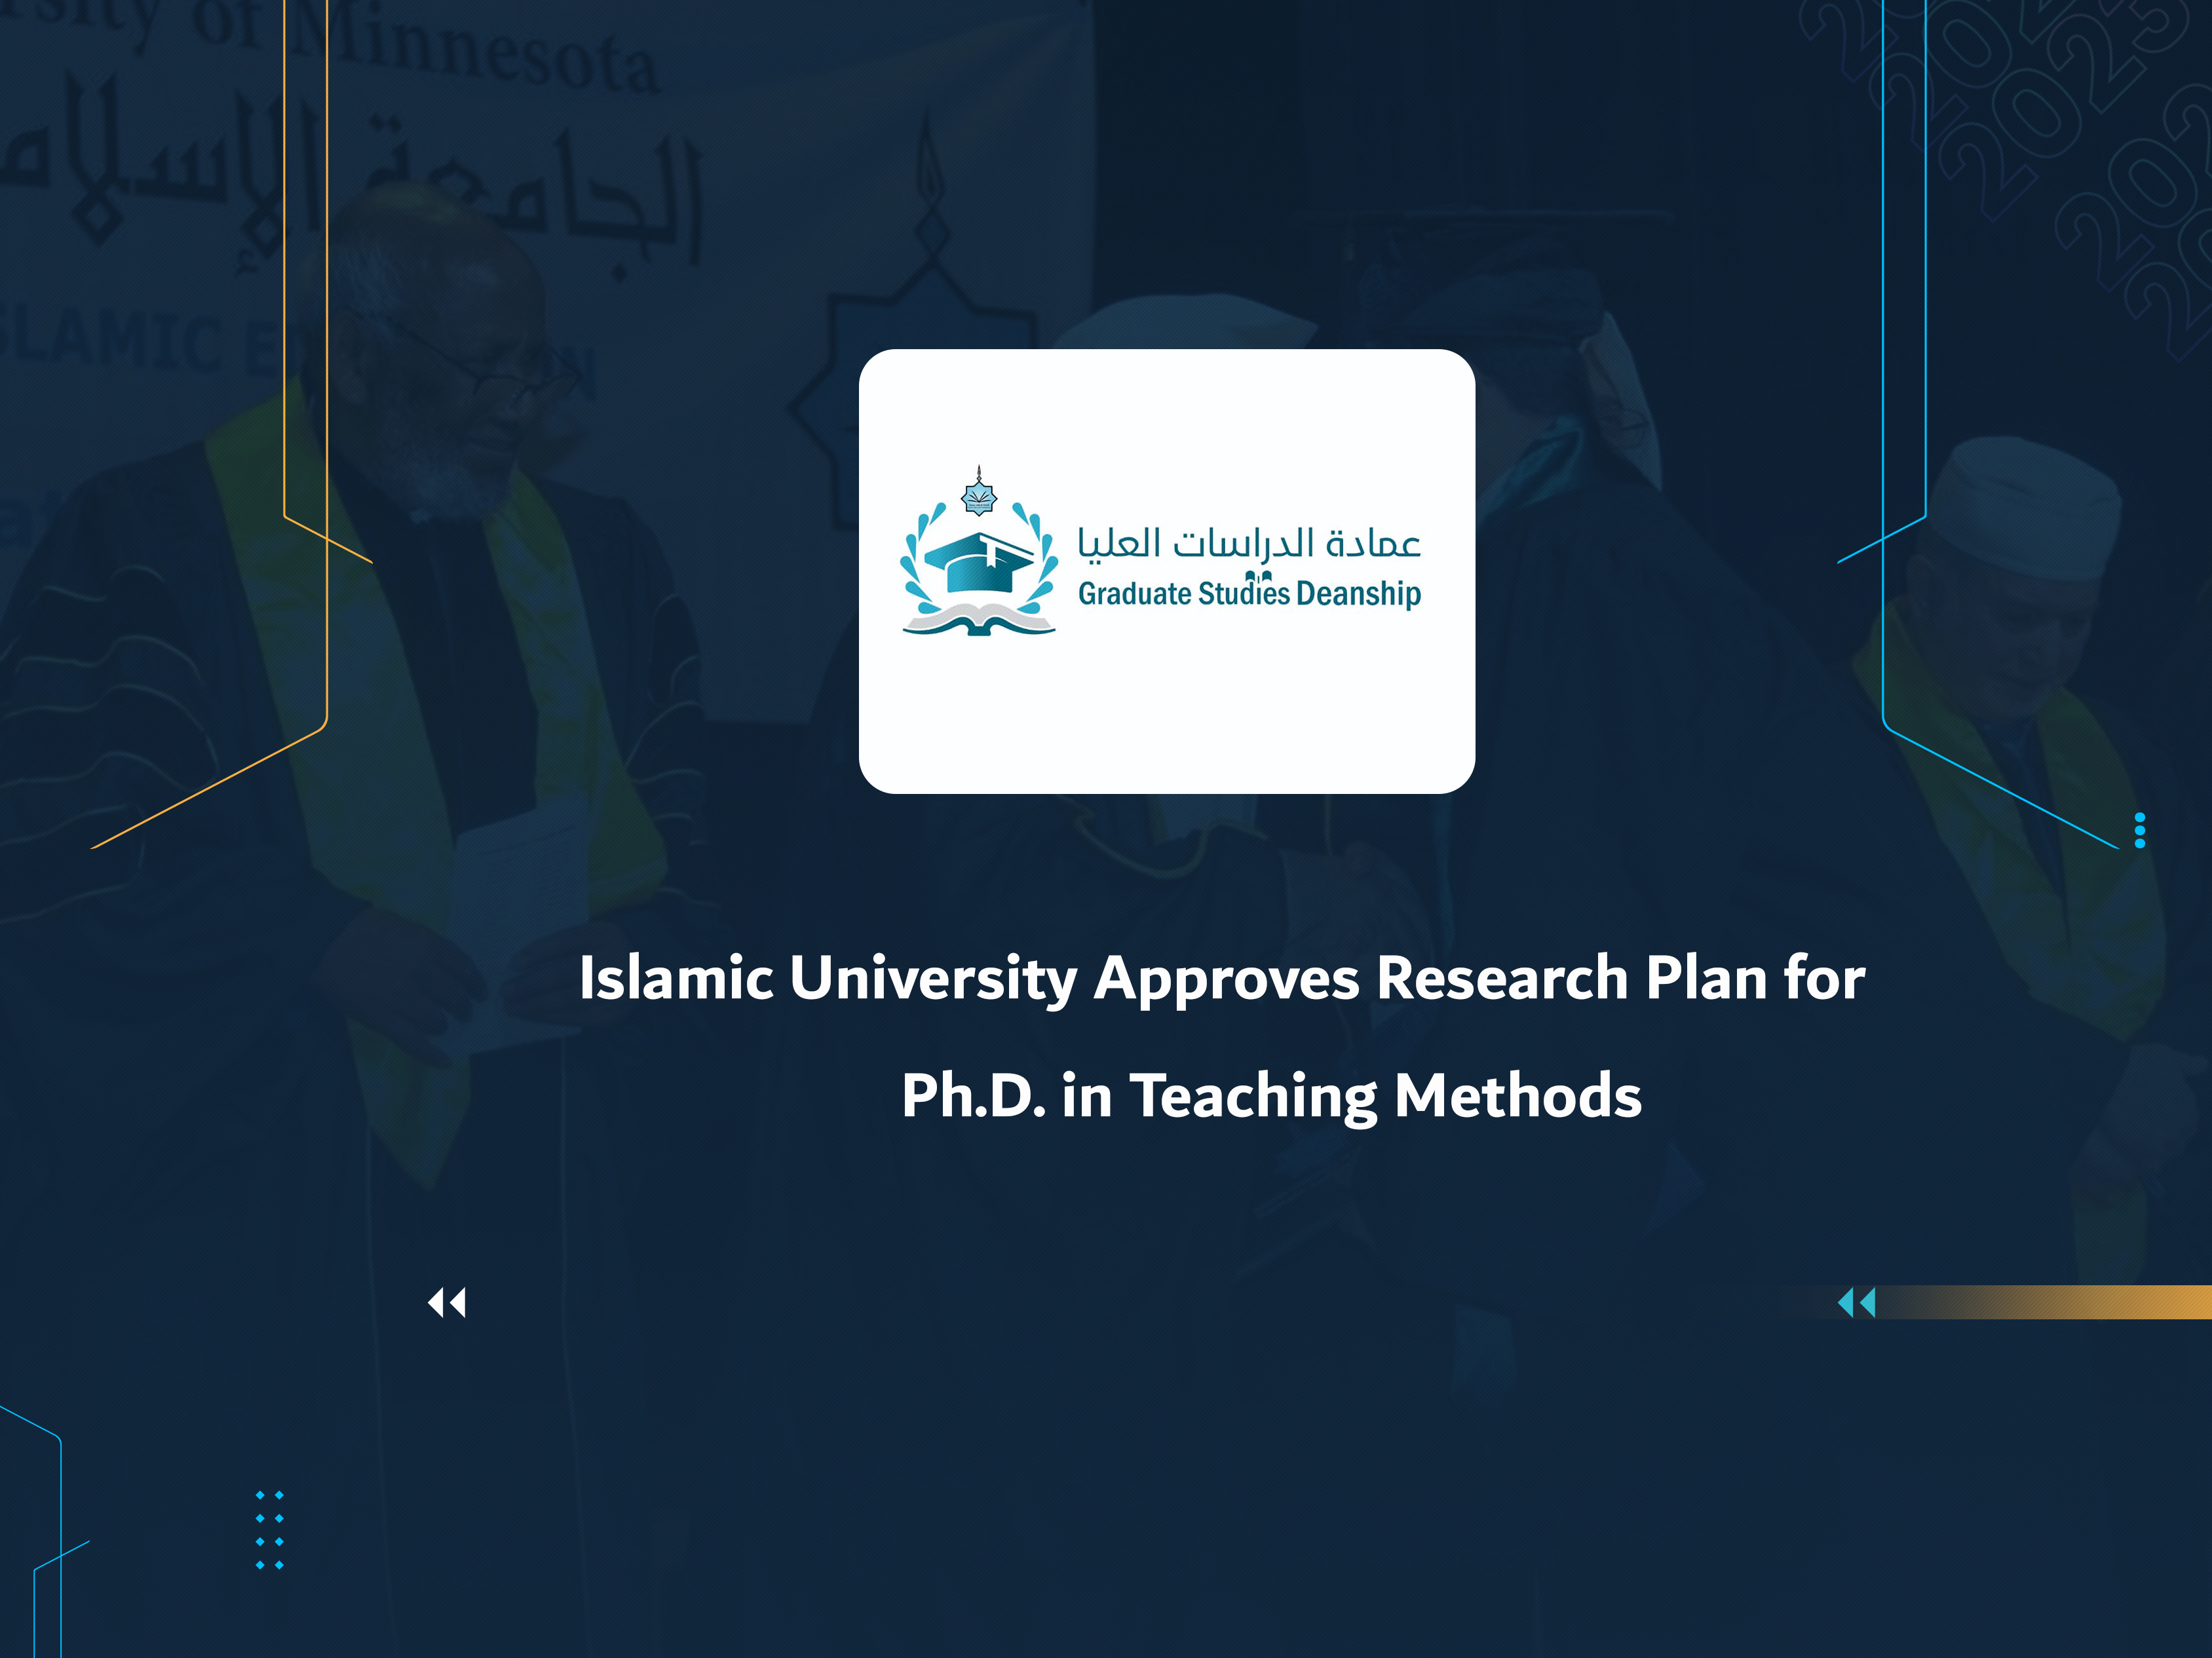 Islamic University Approves Research Plan for Ph.D. in Teaching Methods